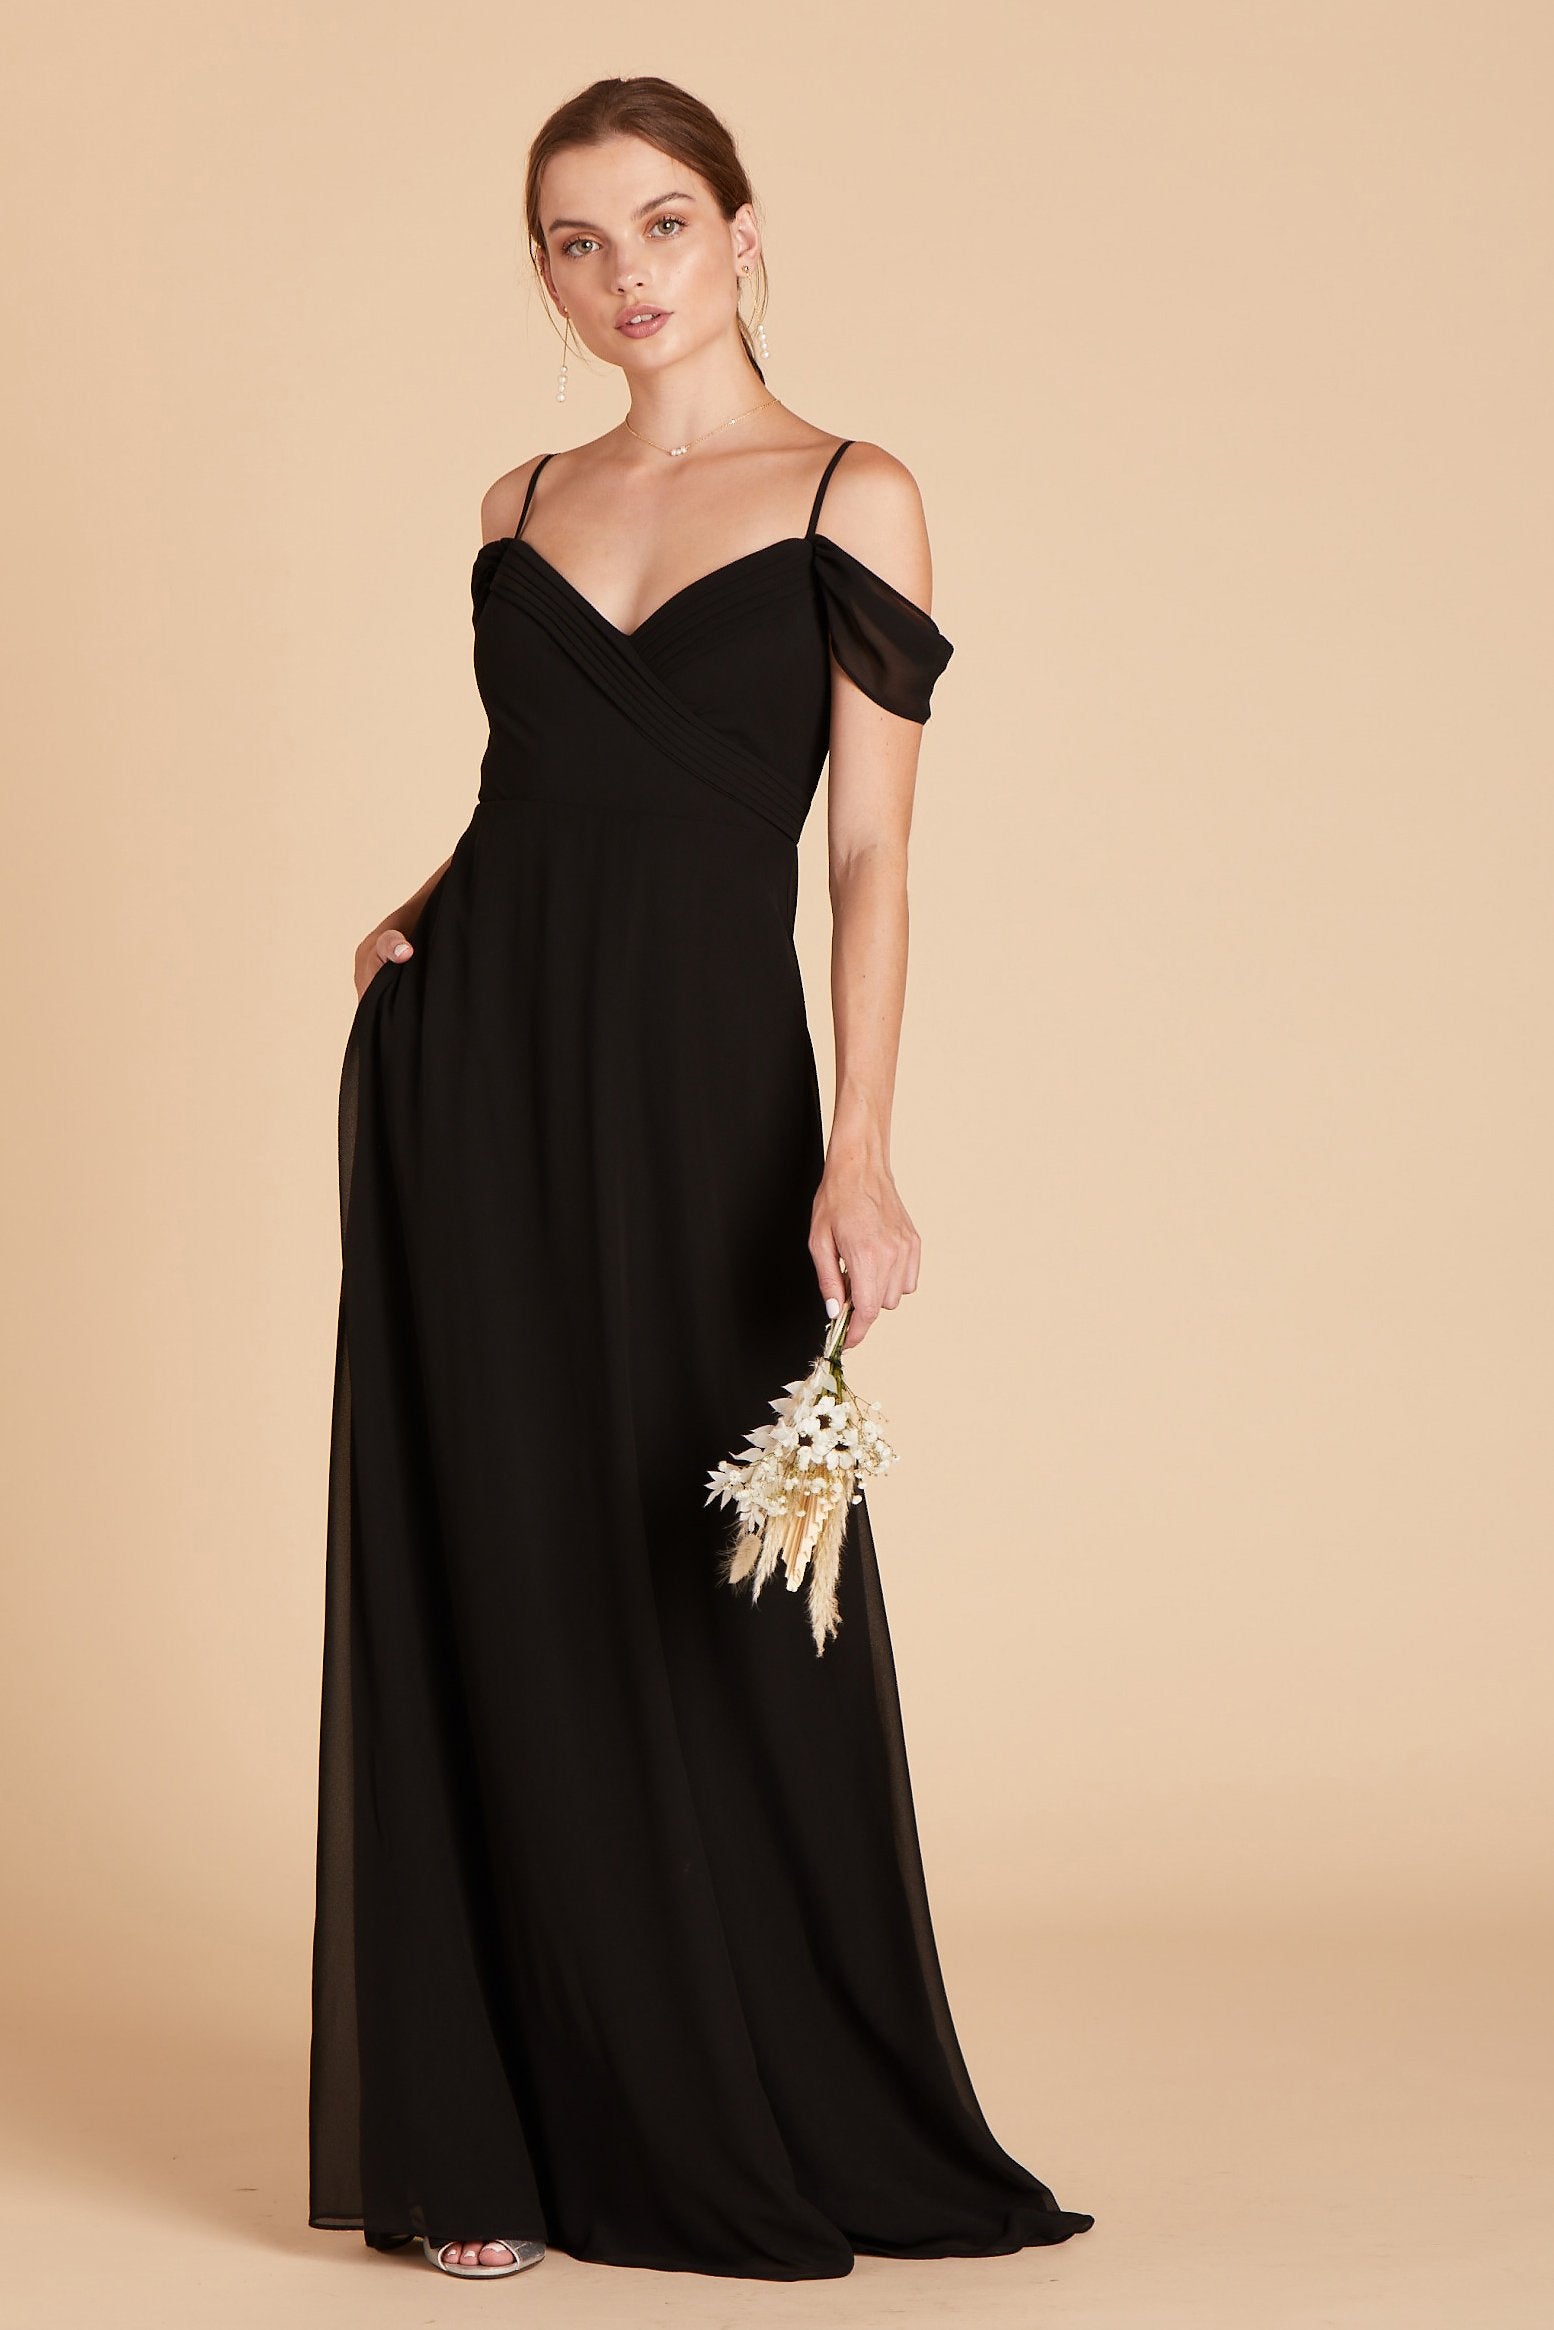 Spence convertible bridesmaid dress in black chiffon by Birdy Grey, front view with hand in pocket 